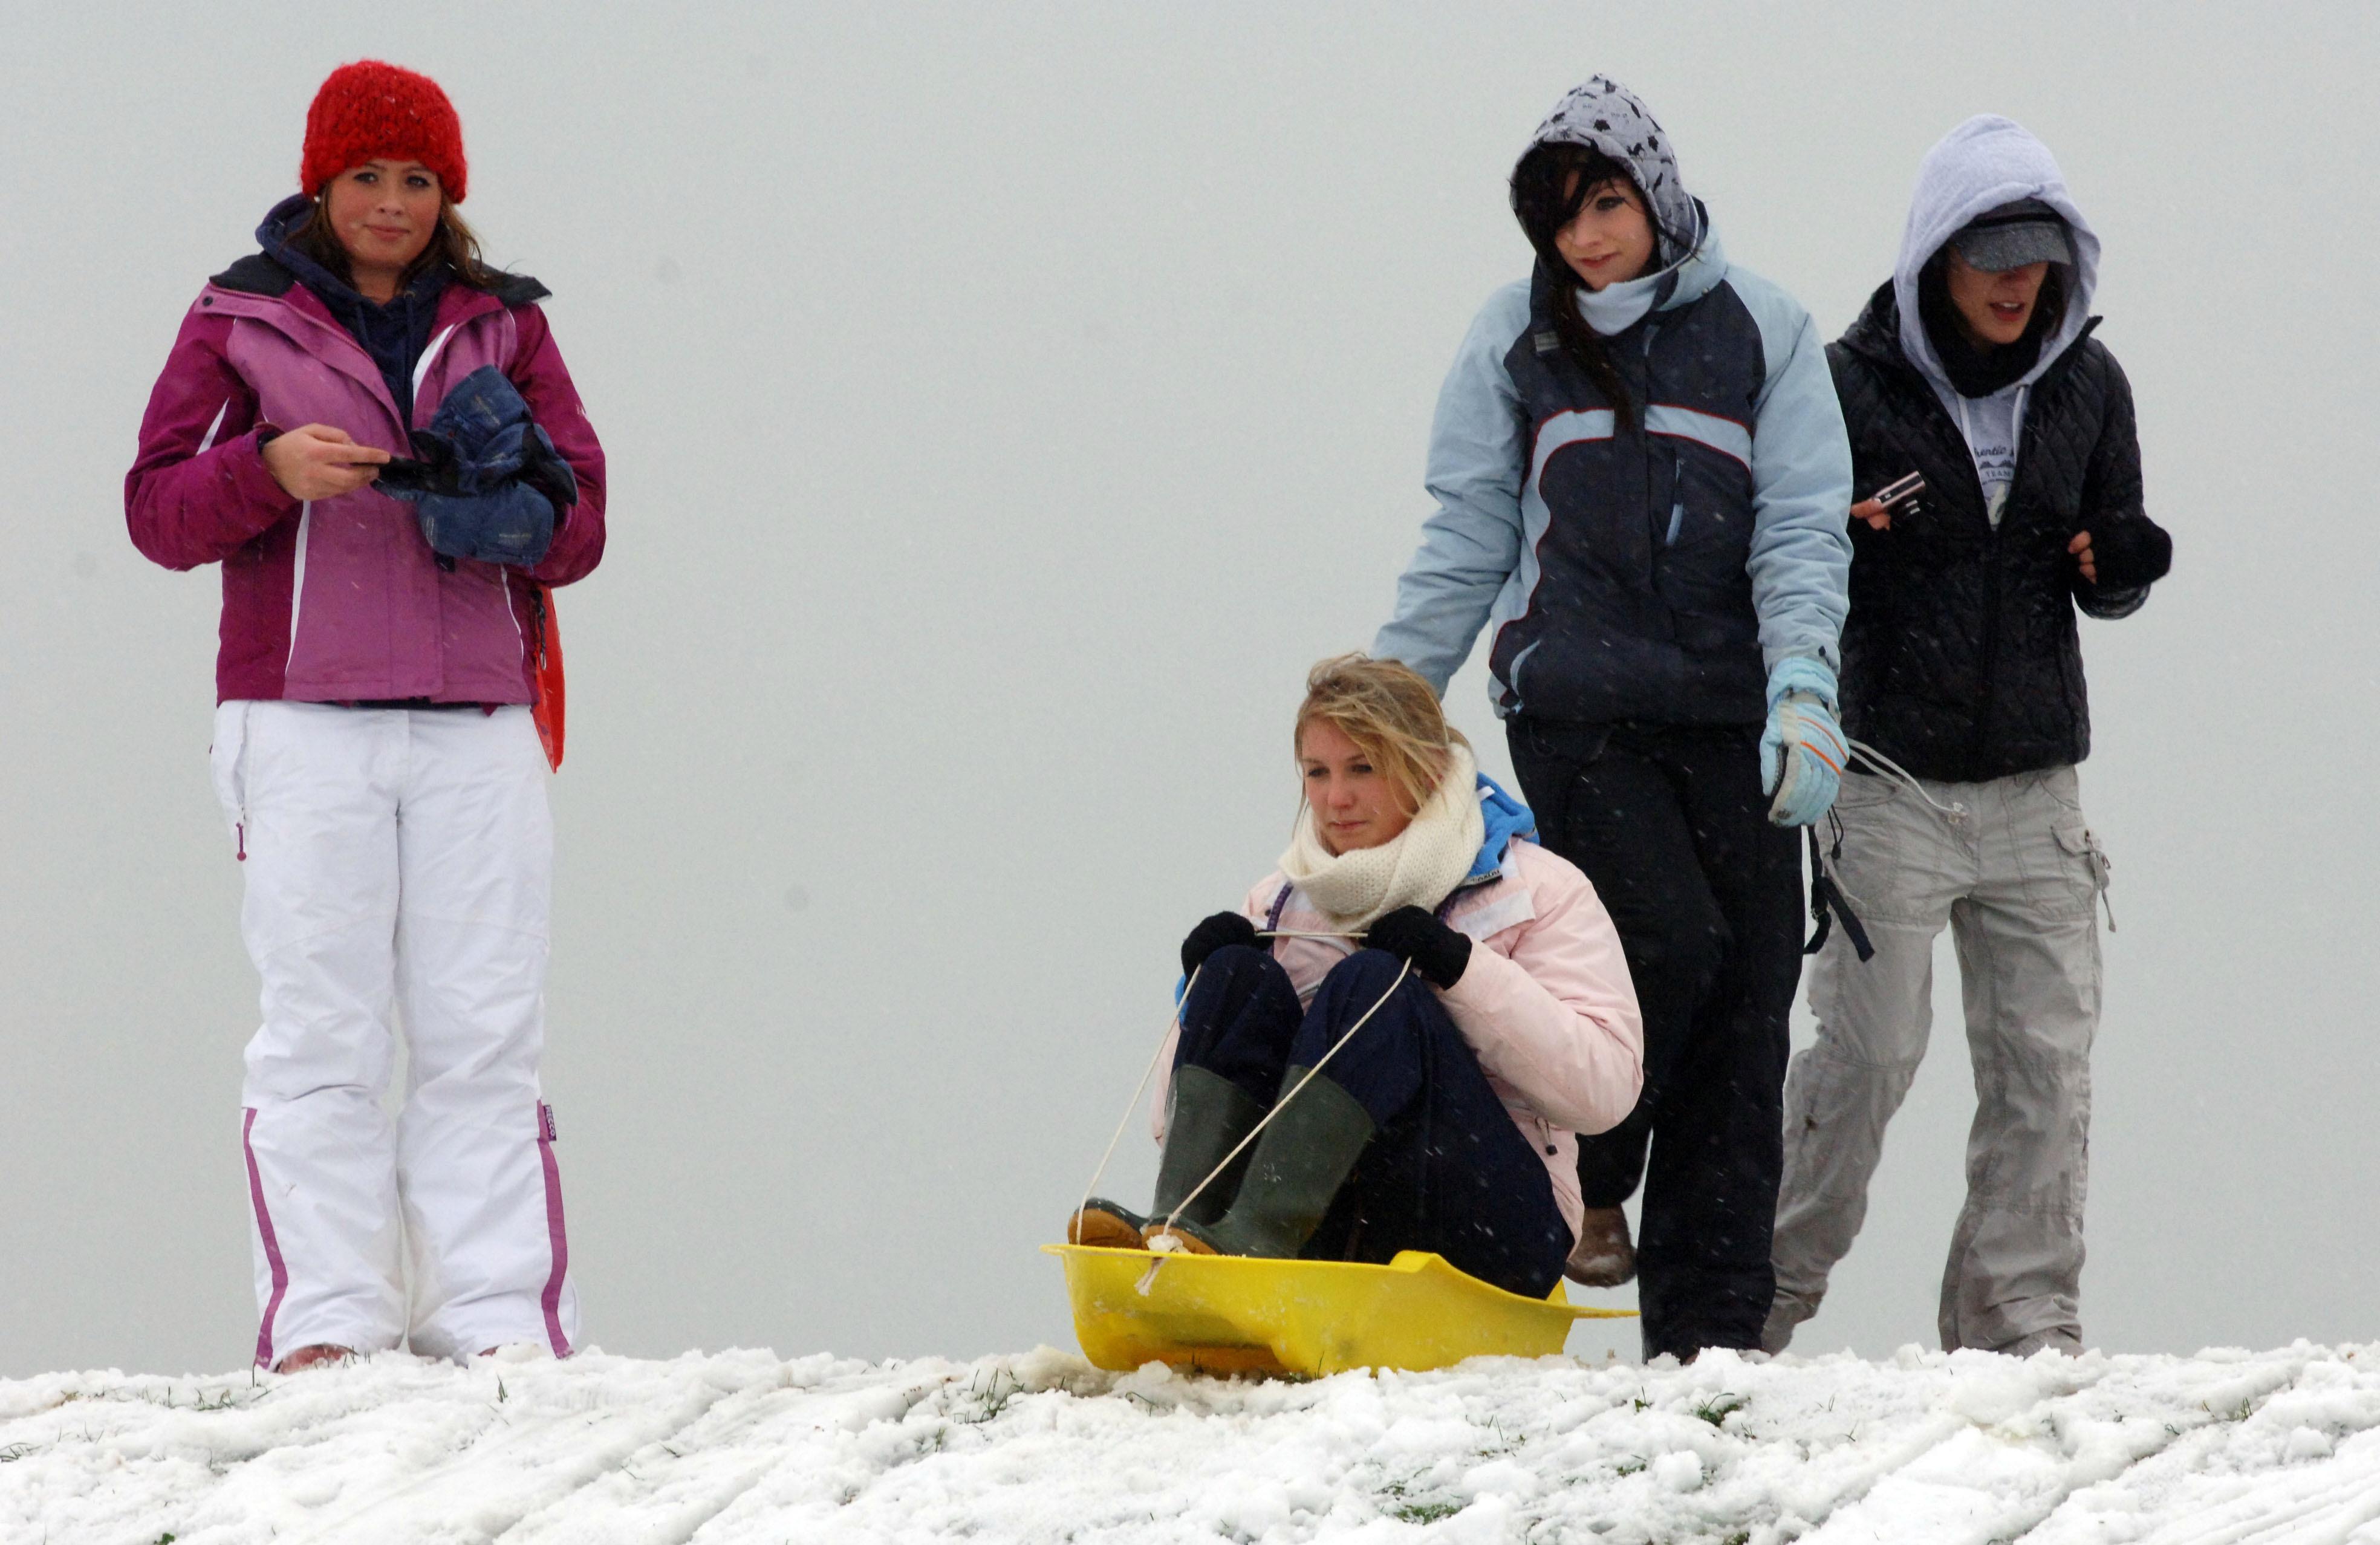 Some teenagers went sledging in Goring. Photo: Malcolm McCluskey